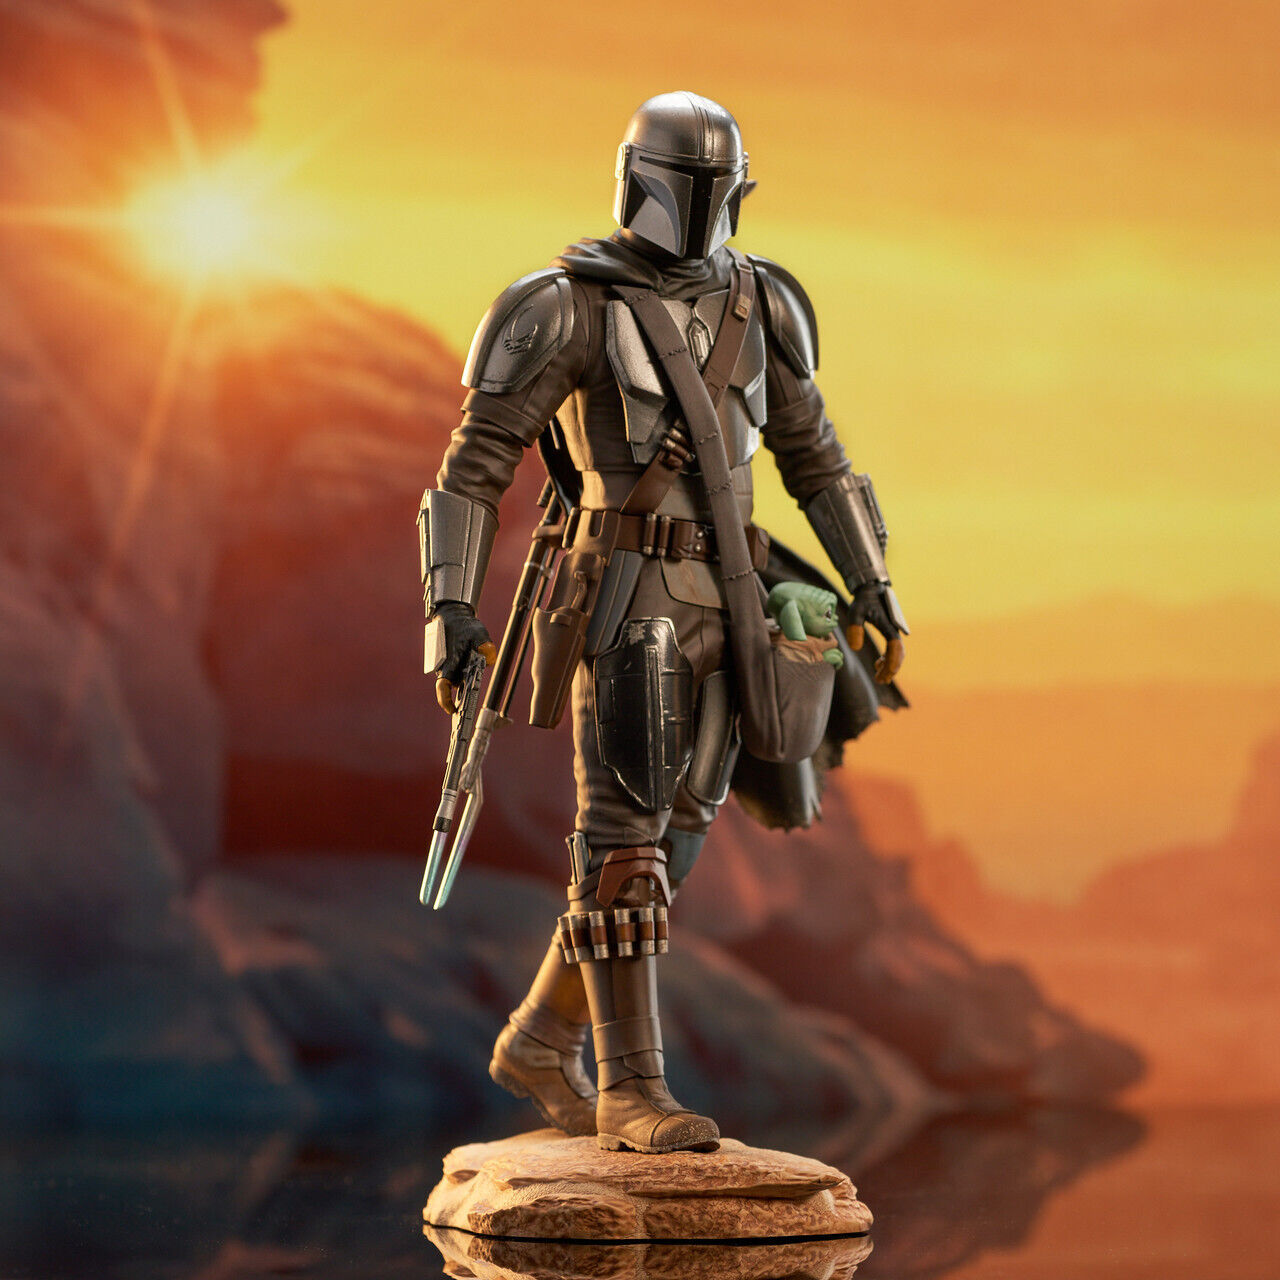 Star Wars Mandalorian with Child Premier Collection Statue — Limited Edition